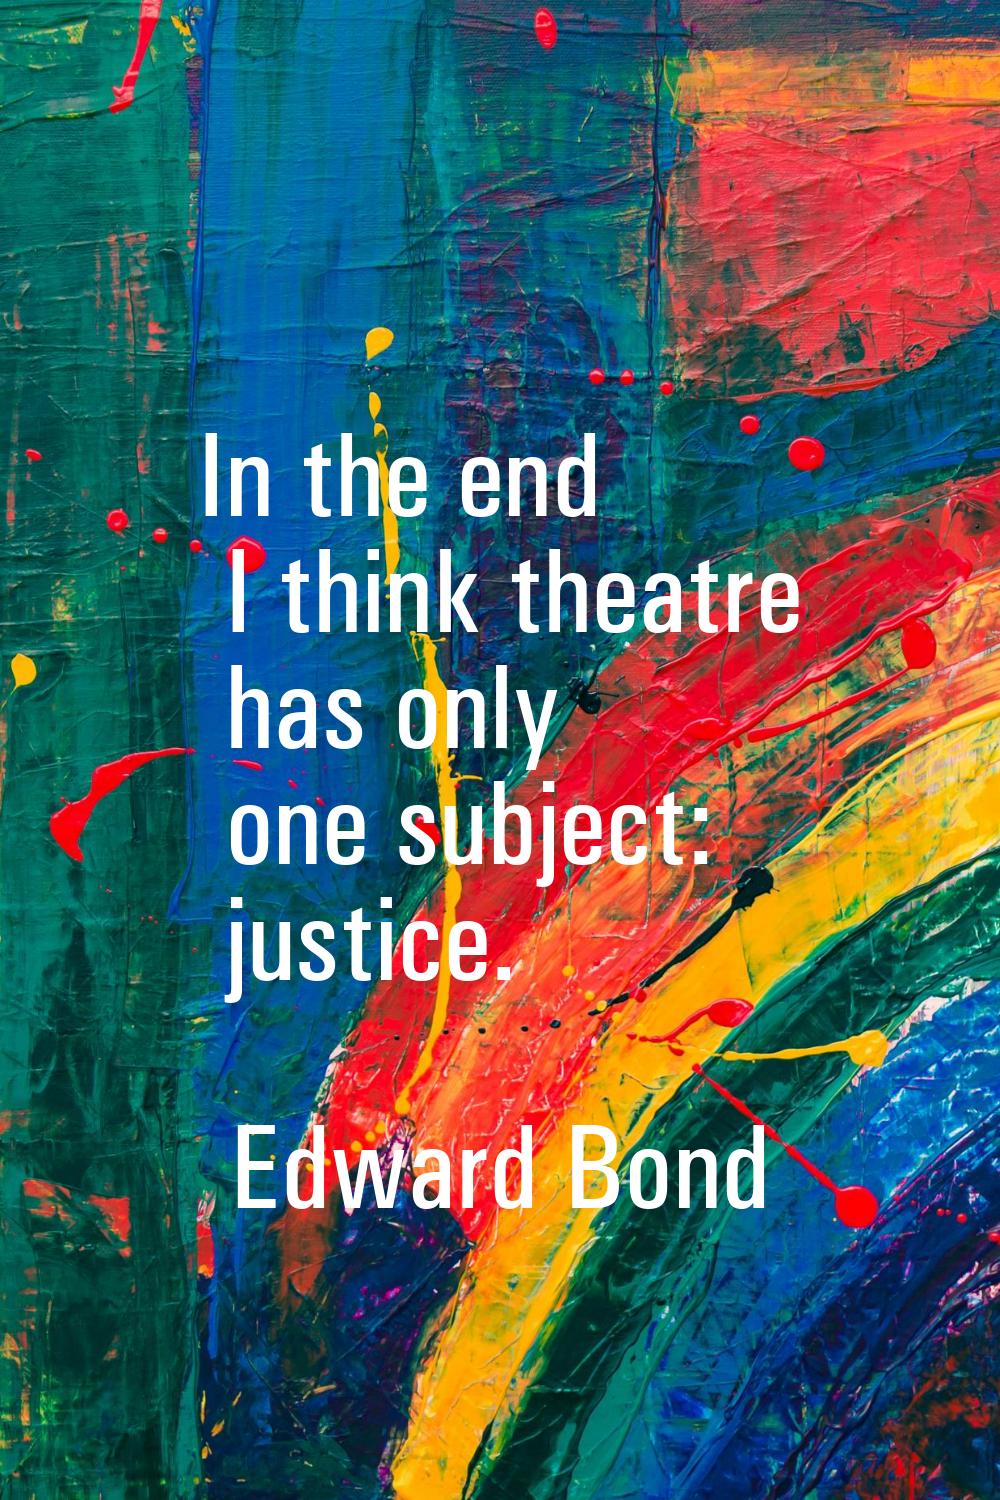 In the end I think theatre has only one subject: justice.